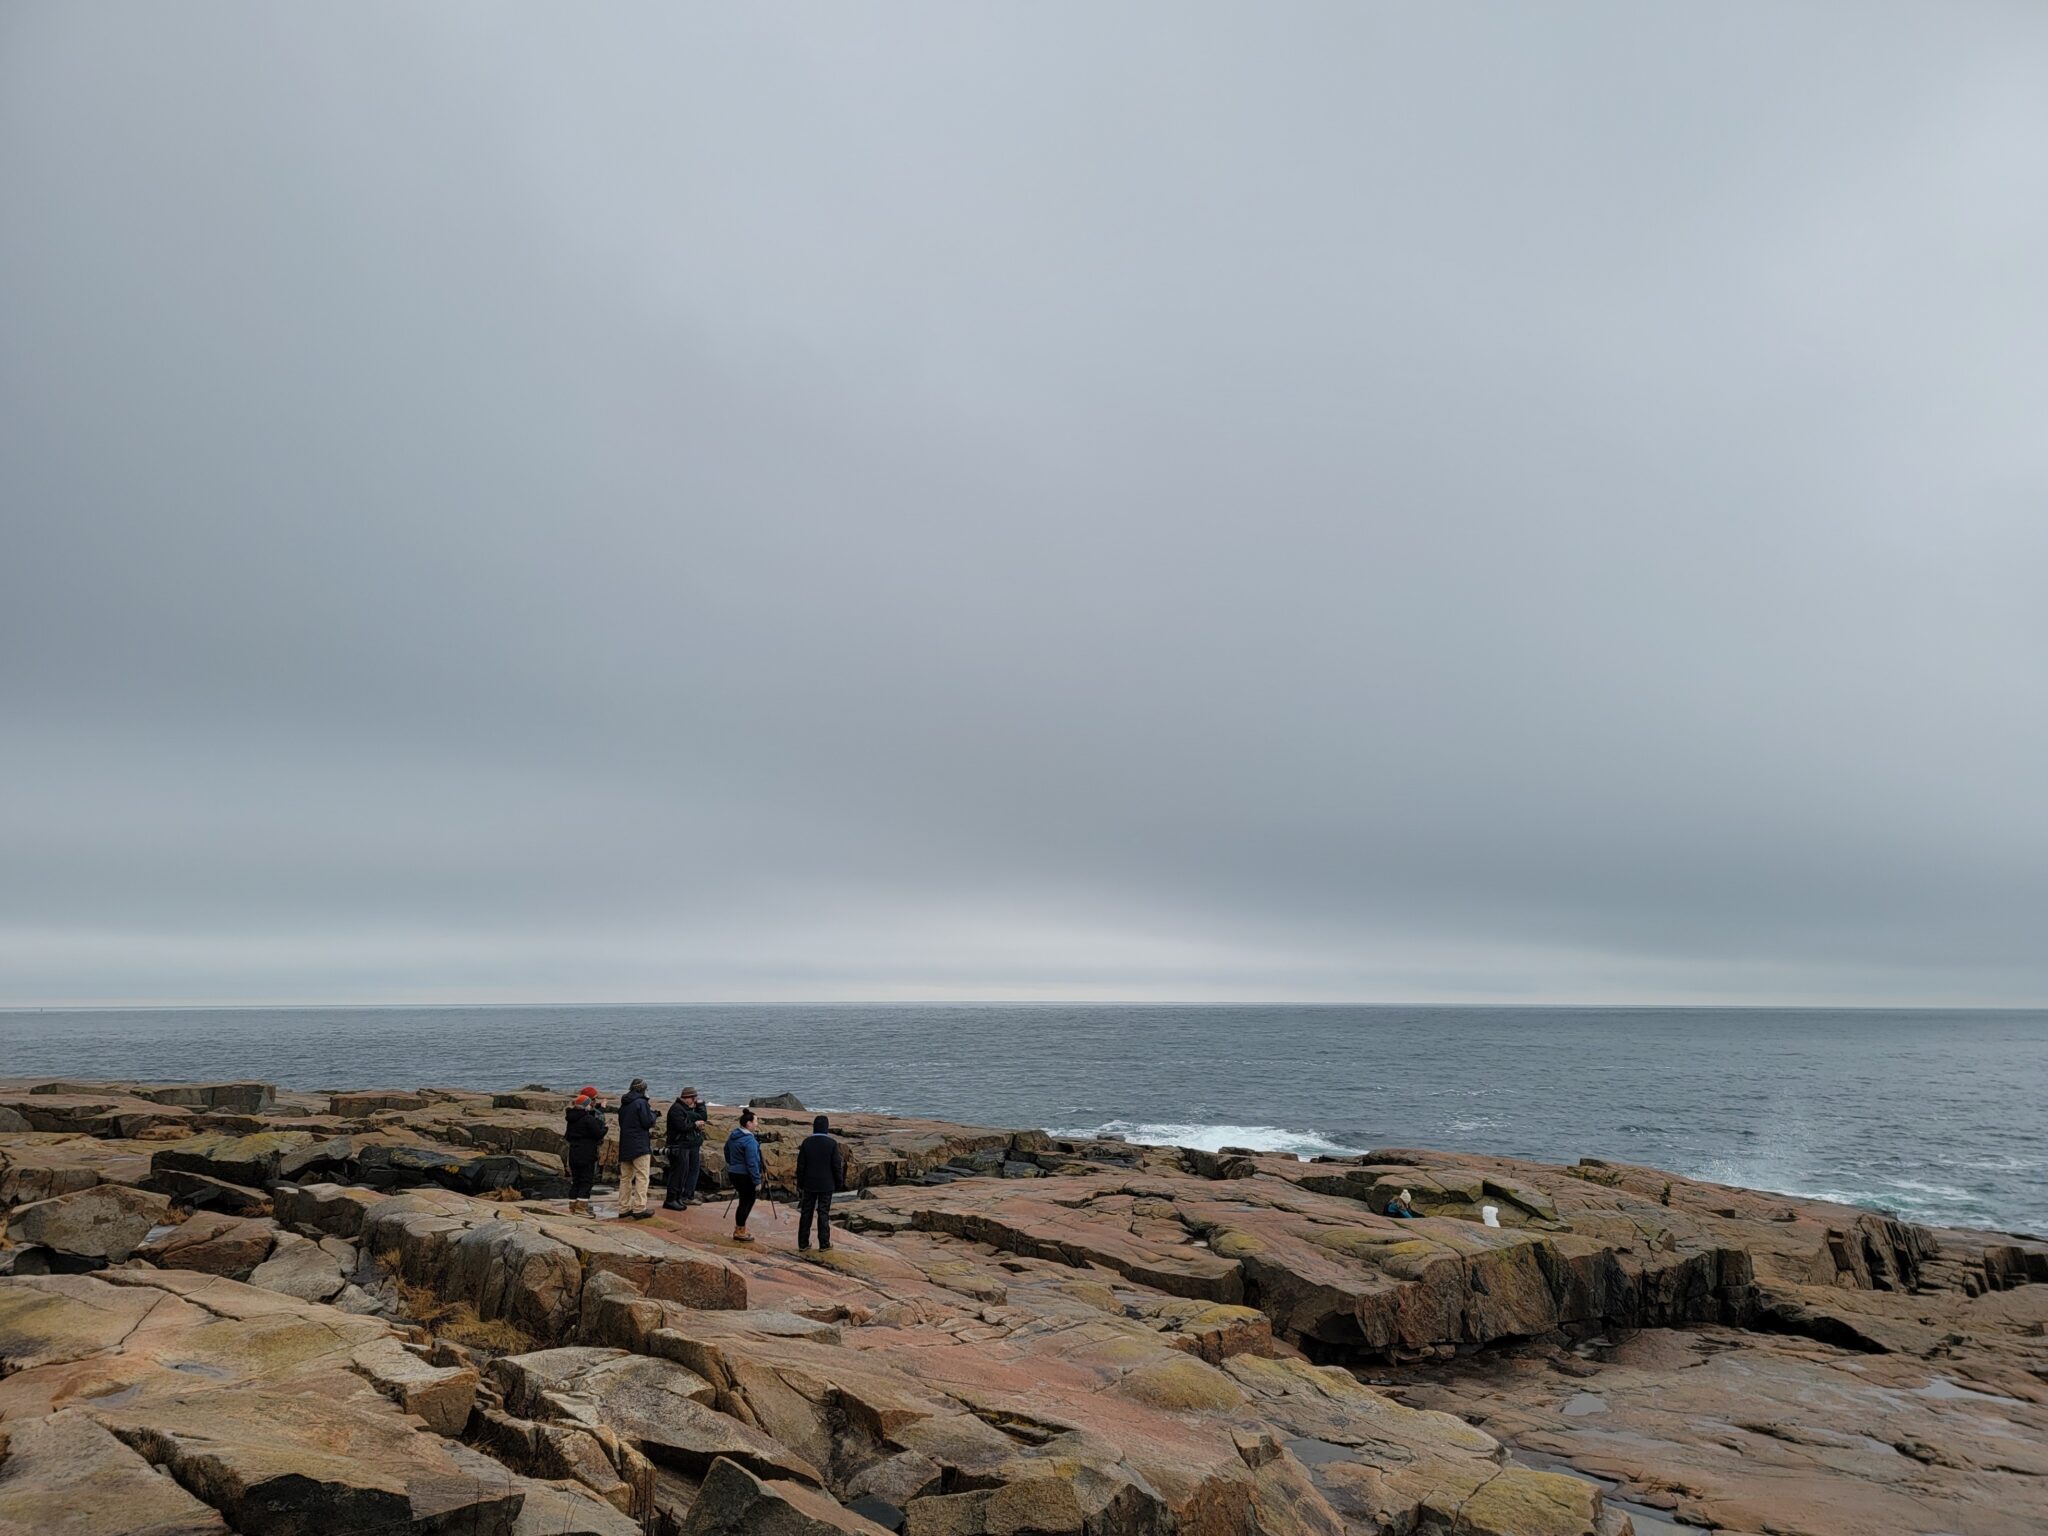 In the distance, a group of five people on the rocky shore at Schoodic Point looking across a calm sea to the horizon. The sky is overcast.